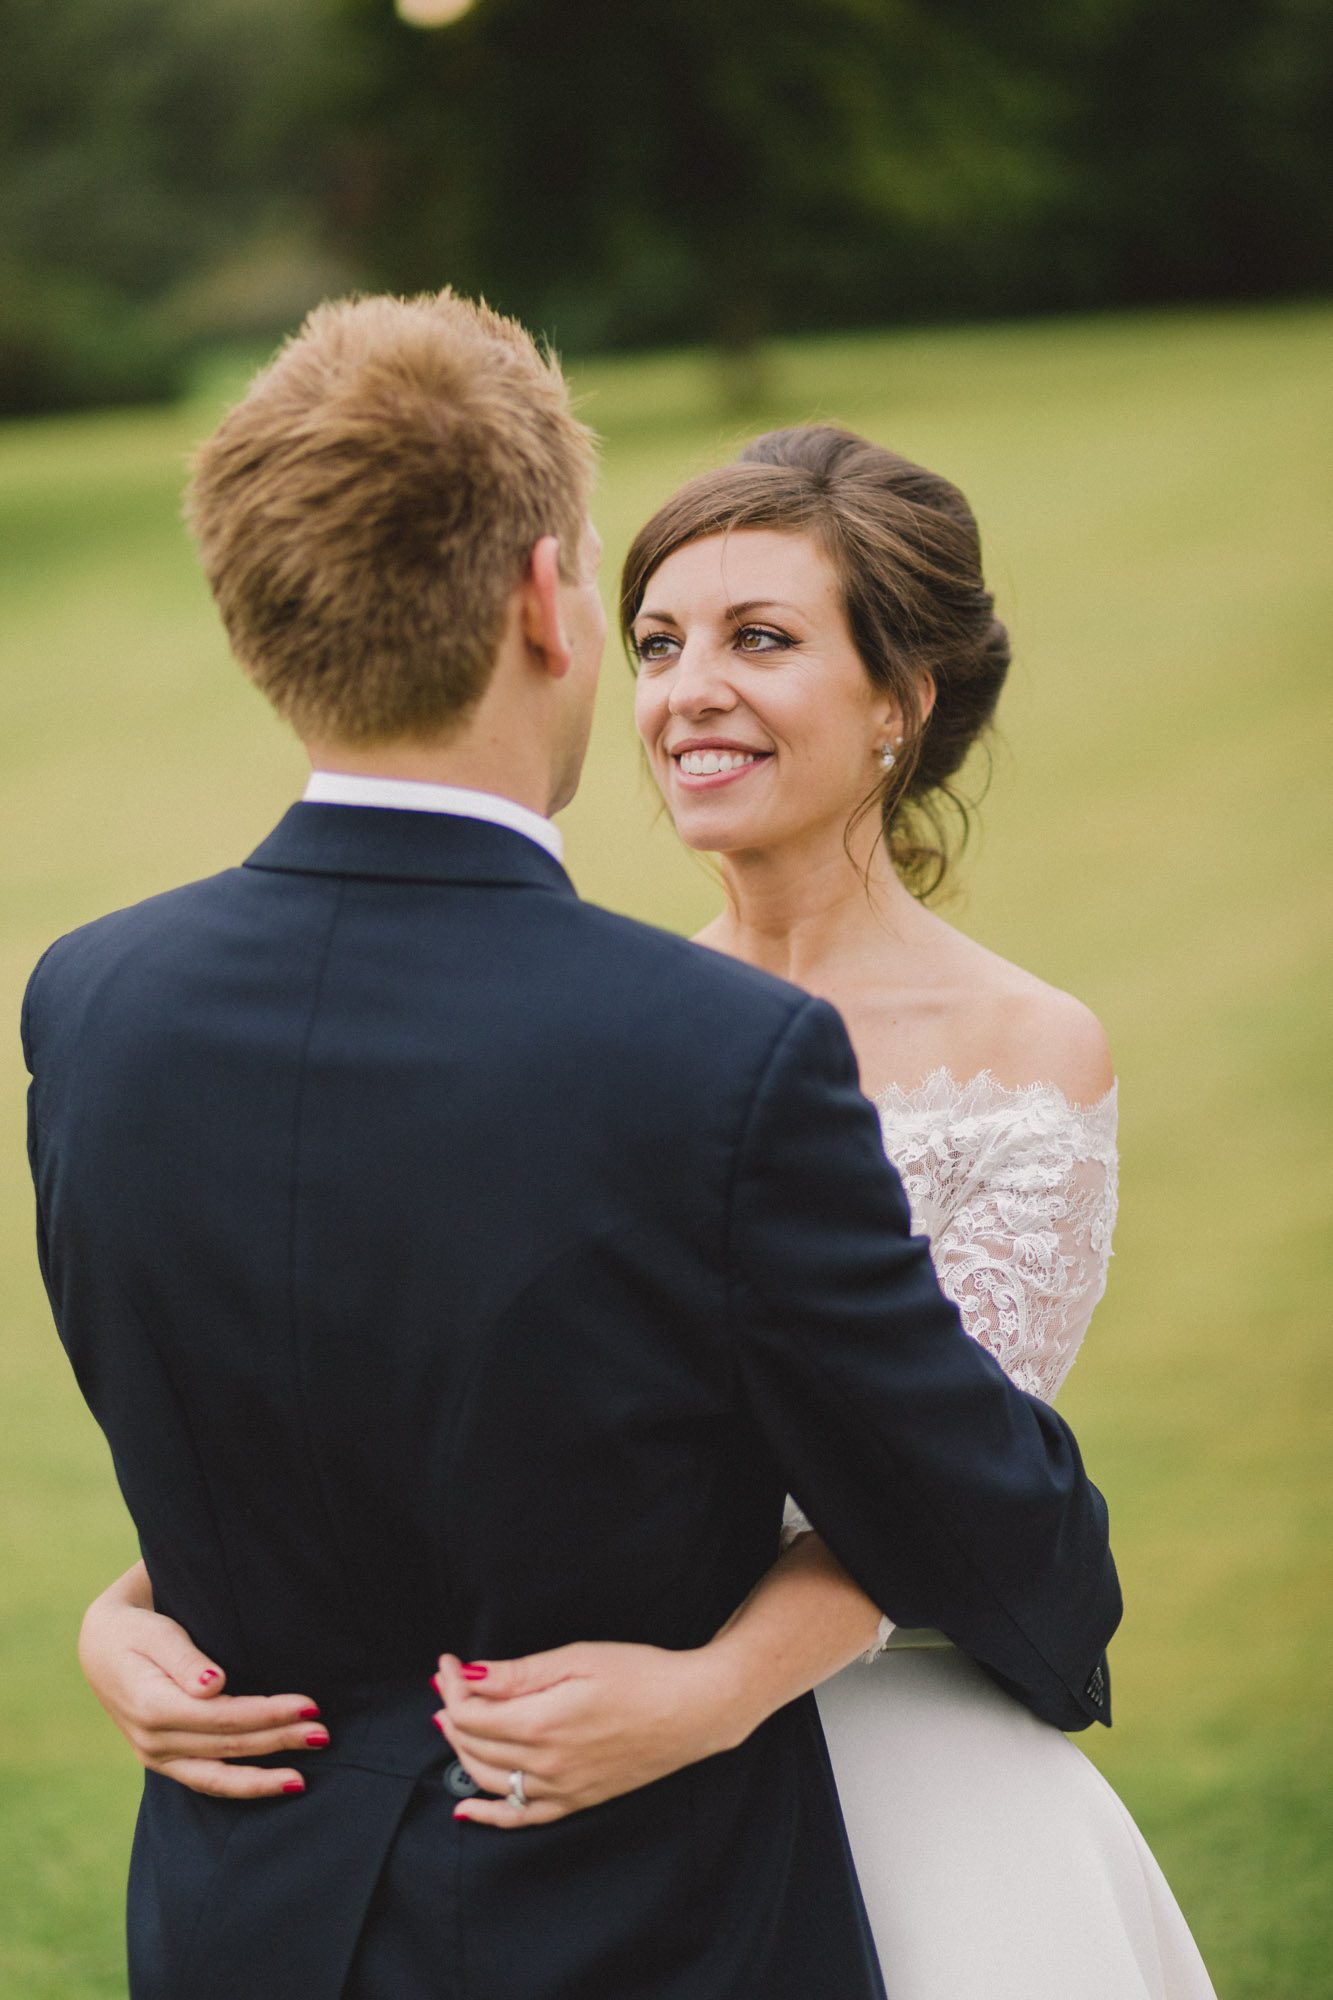 Bride and groom stare lovingly in to each other's eyes on their wedding day at Ashdown Park Wedding Venue in Sussex.